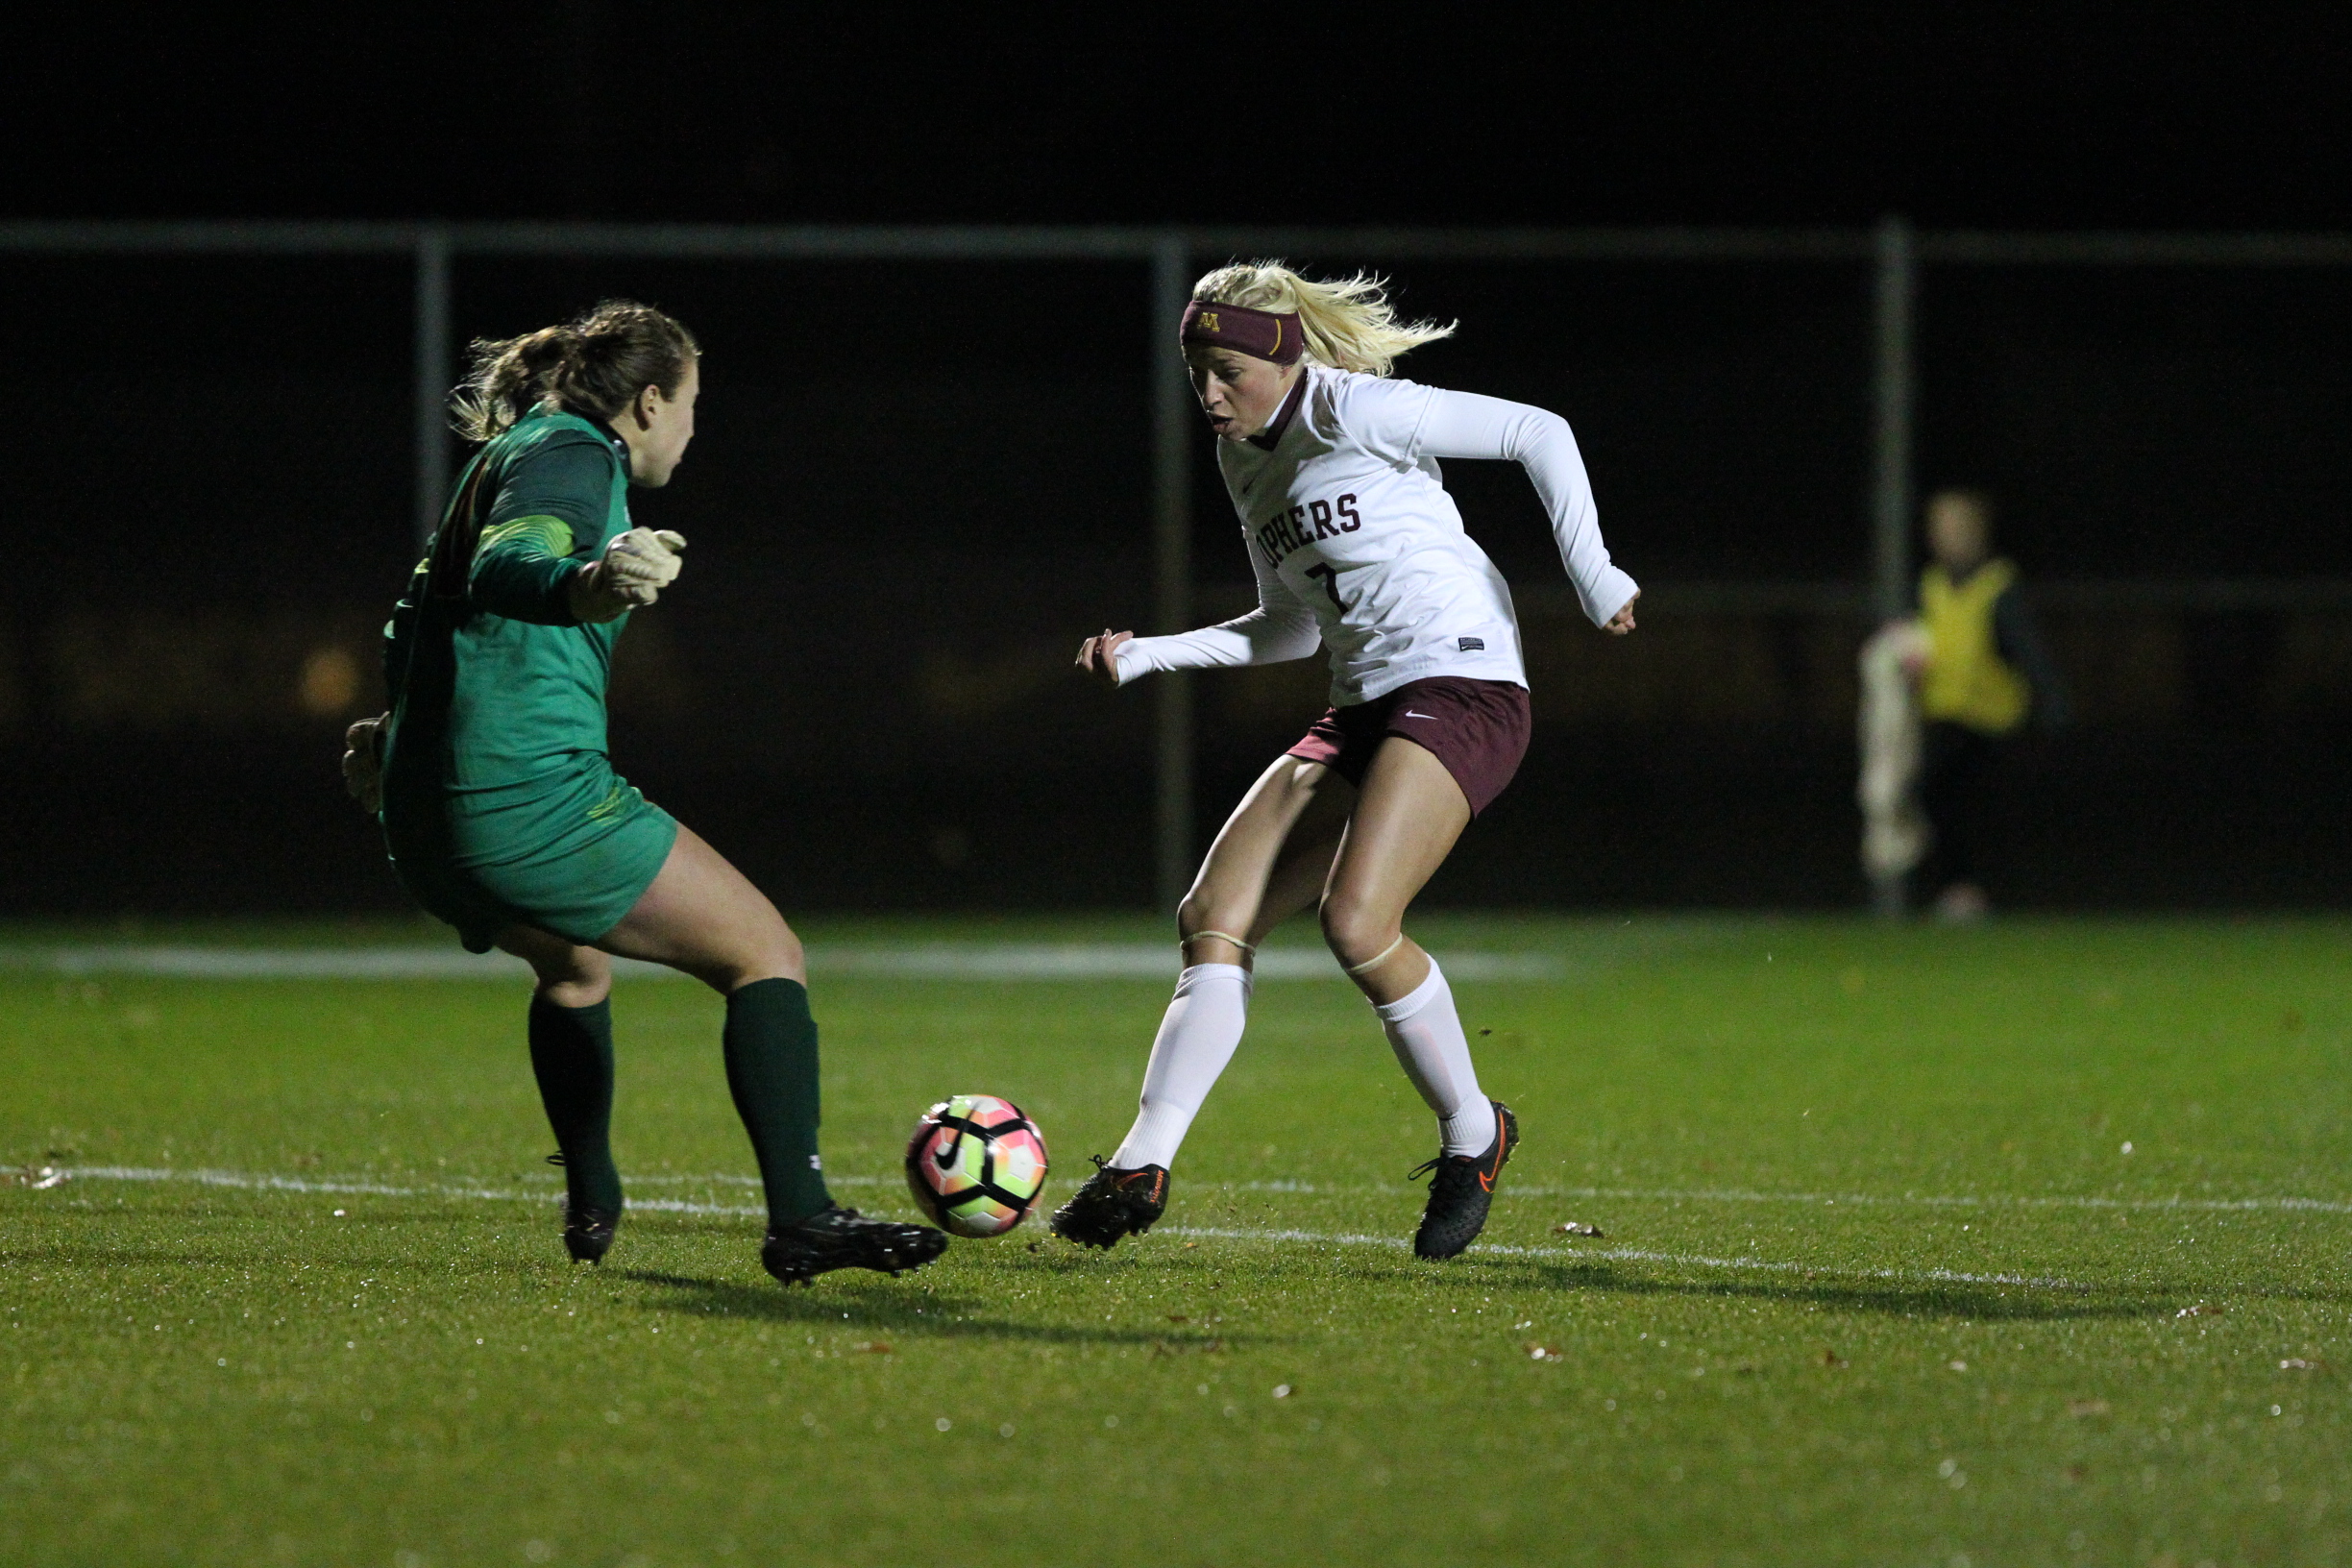 Sydney Squires scored two of the six goals in the win over Maryland. Photo by Jeremy Olson - www.digitalgopher.com